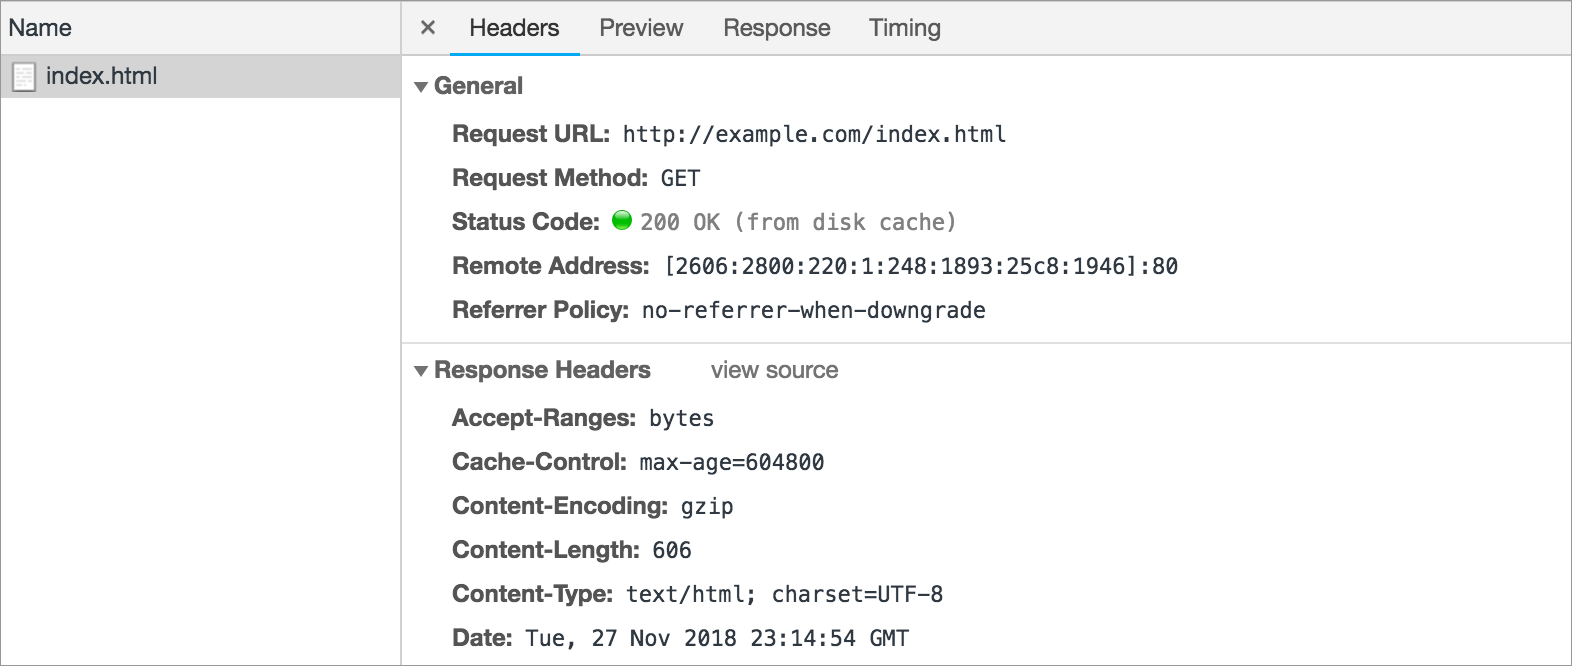 Screenshot of Chrome Developer Tools, "Network" tab. Left-side shows "index.html" selected. Right side shows tabbed interface with "Headers" tab opened. Headers tab has sections for "General" and "Response headers".